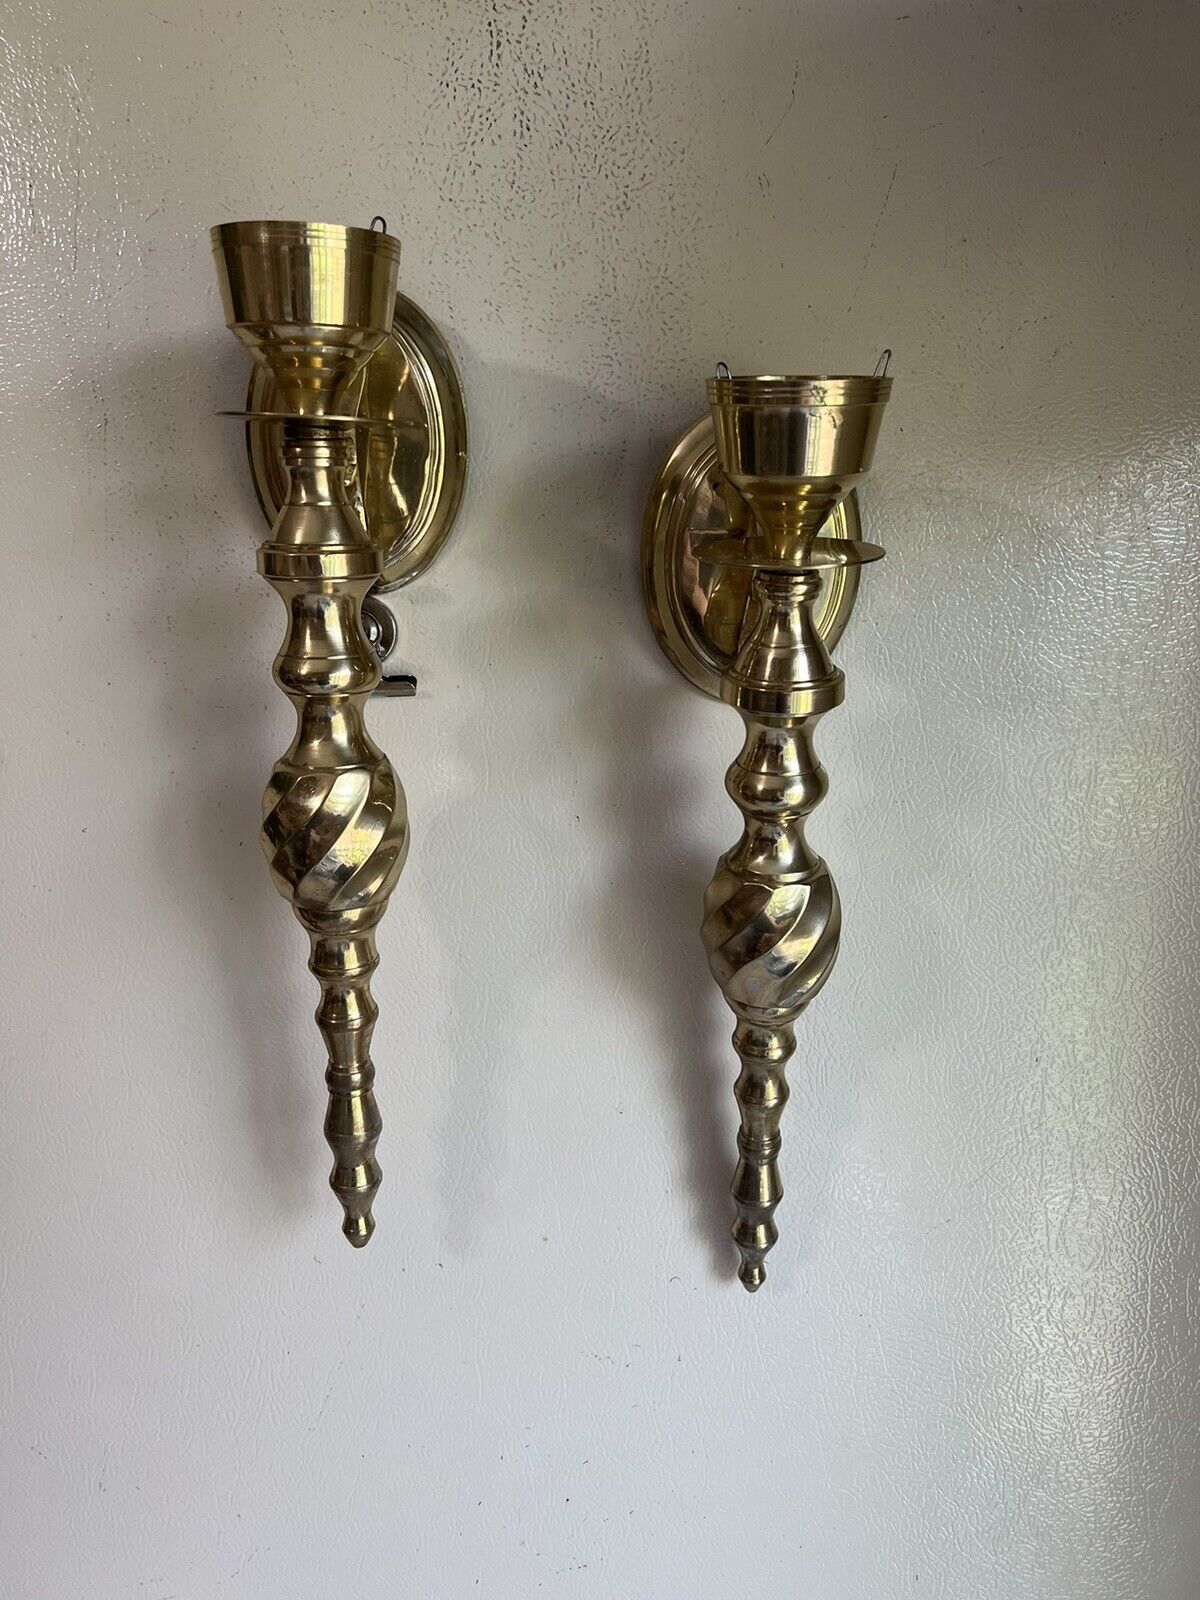 Vintage Pair of 2 Solid Brass Wall Candle Holders Sconces 14 Inches